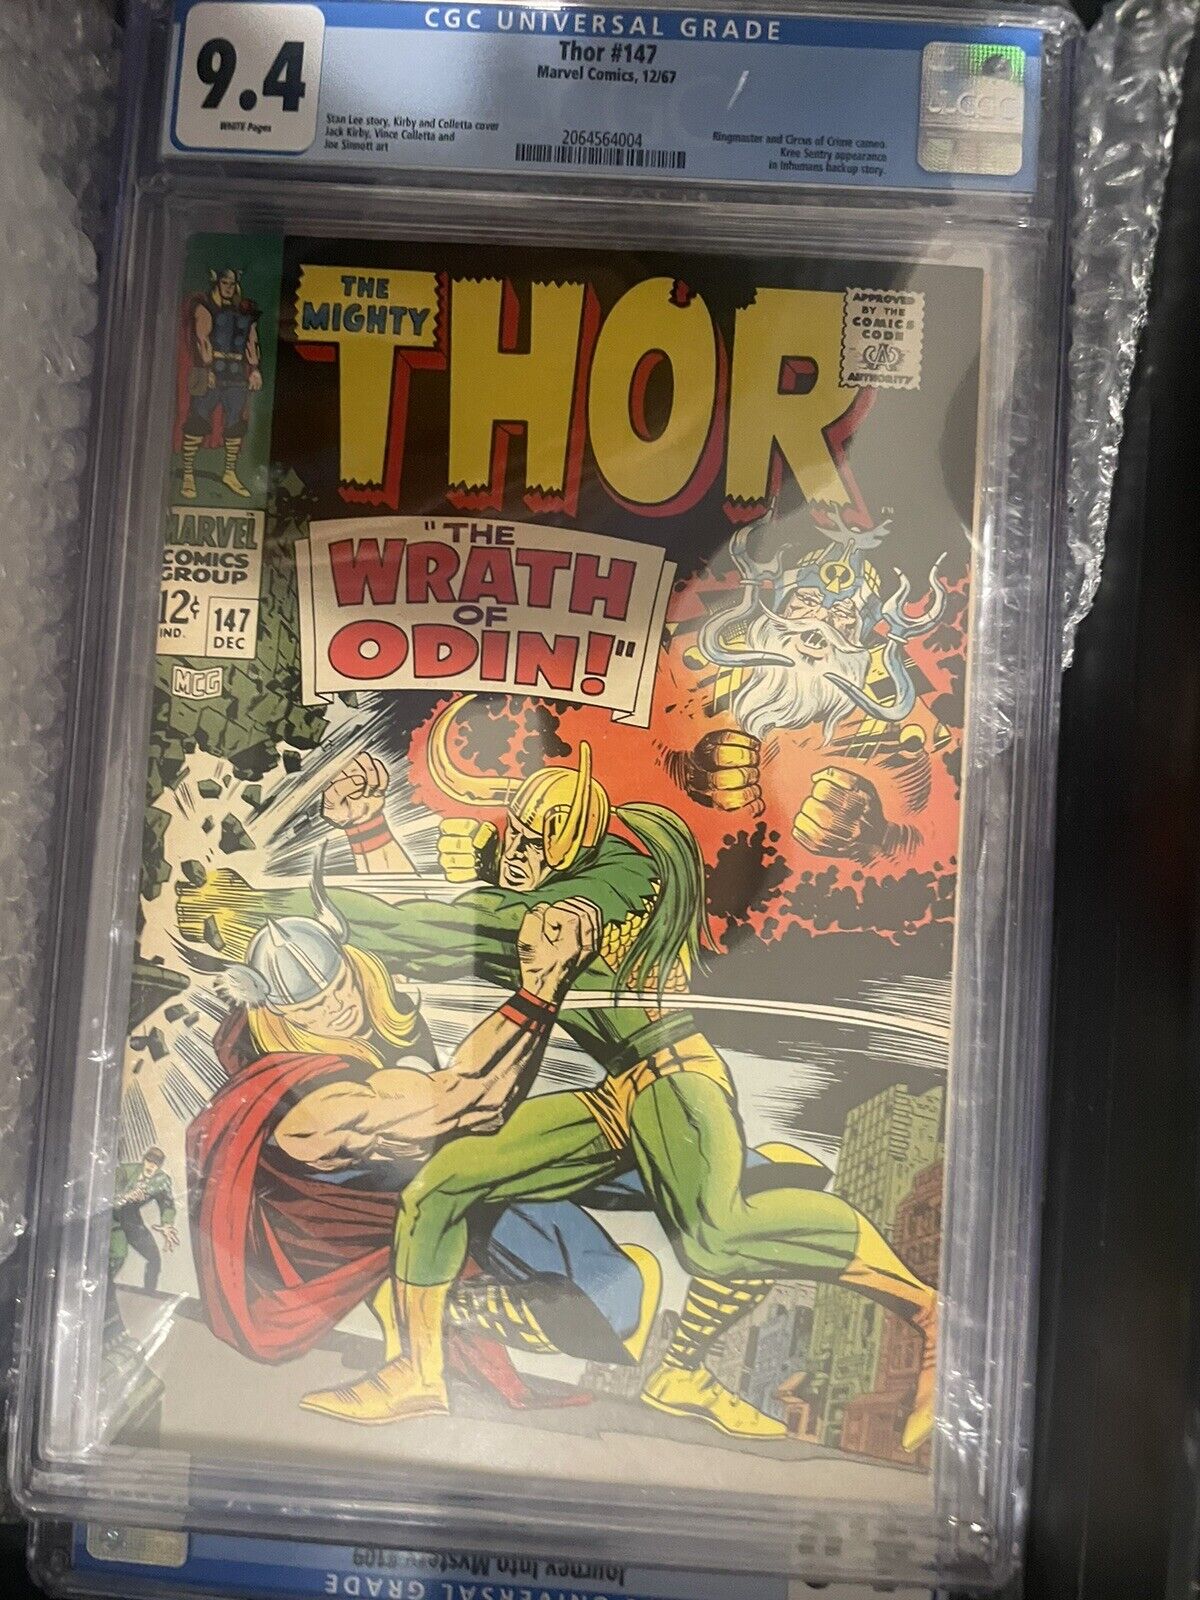 THOR #147 CGC 9.4 NM  BRIGHT WHITE PAGES  CLASSIC LOKI COVER  SUPER SHARP COPY